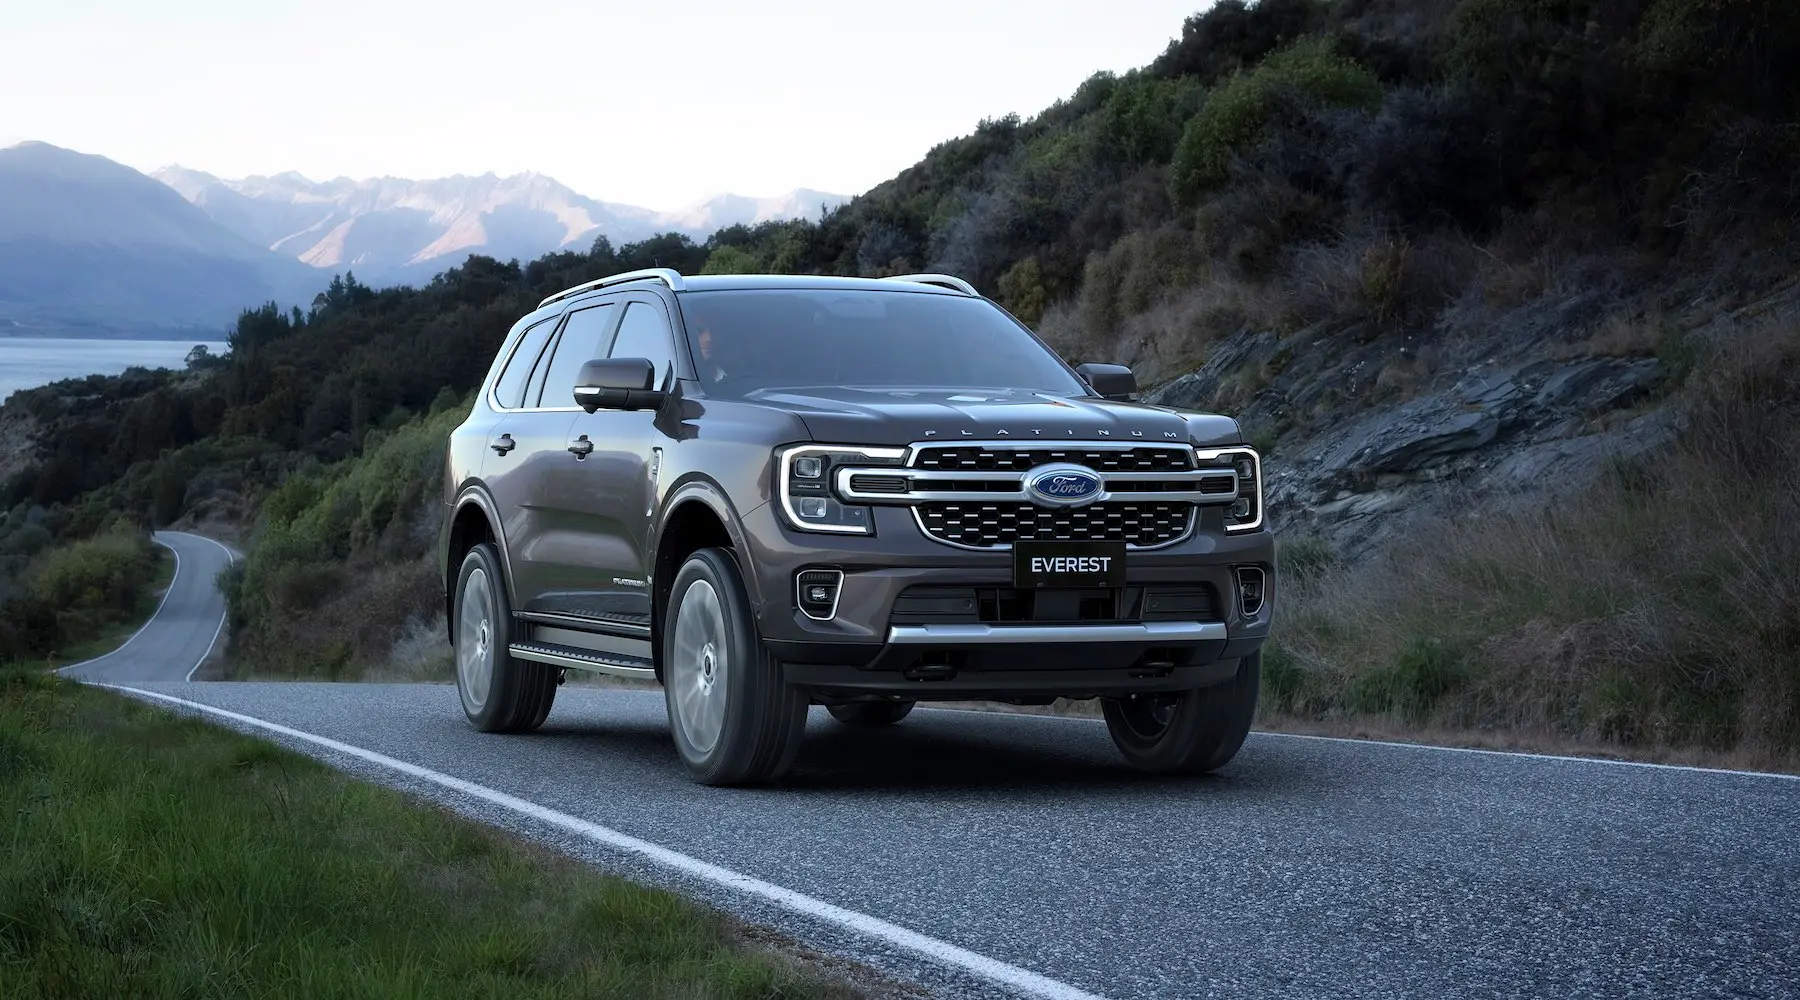 2022 Ford Everest breaks cover: More tech, power, comfort and capability for Ford’s Ranger-based 4×4 SUV